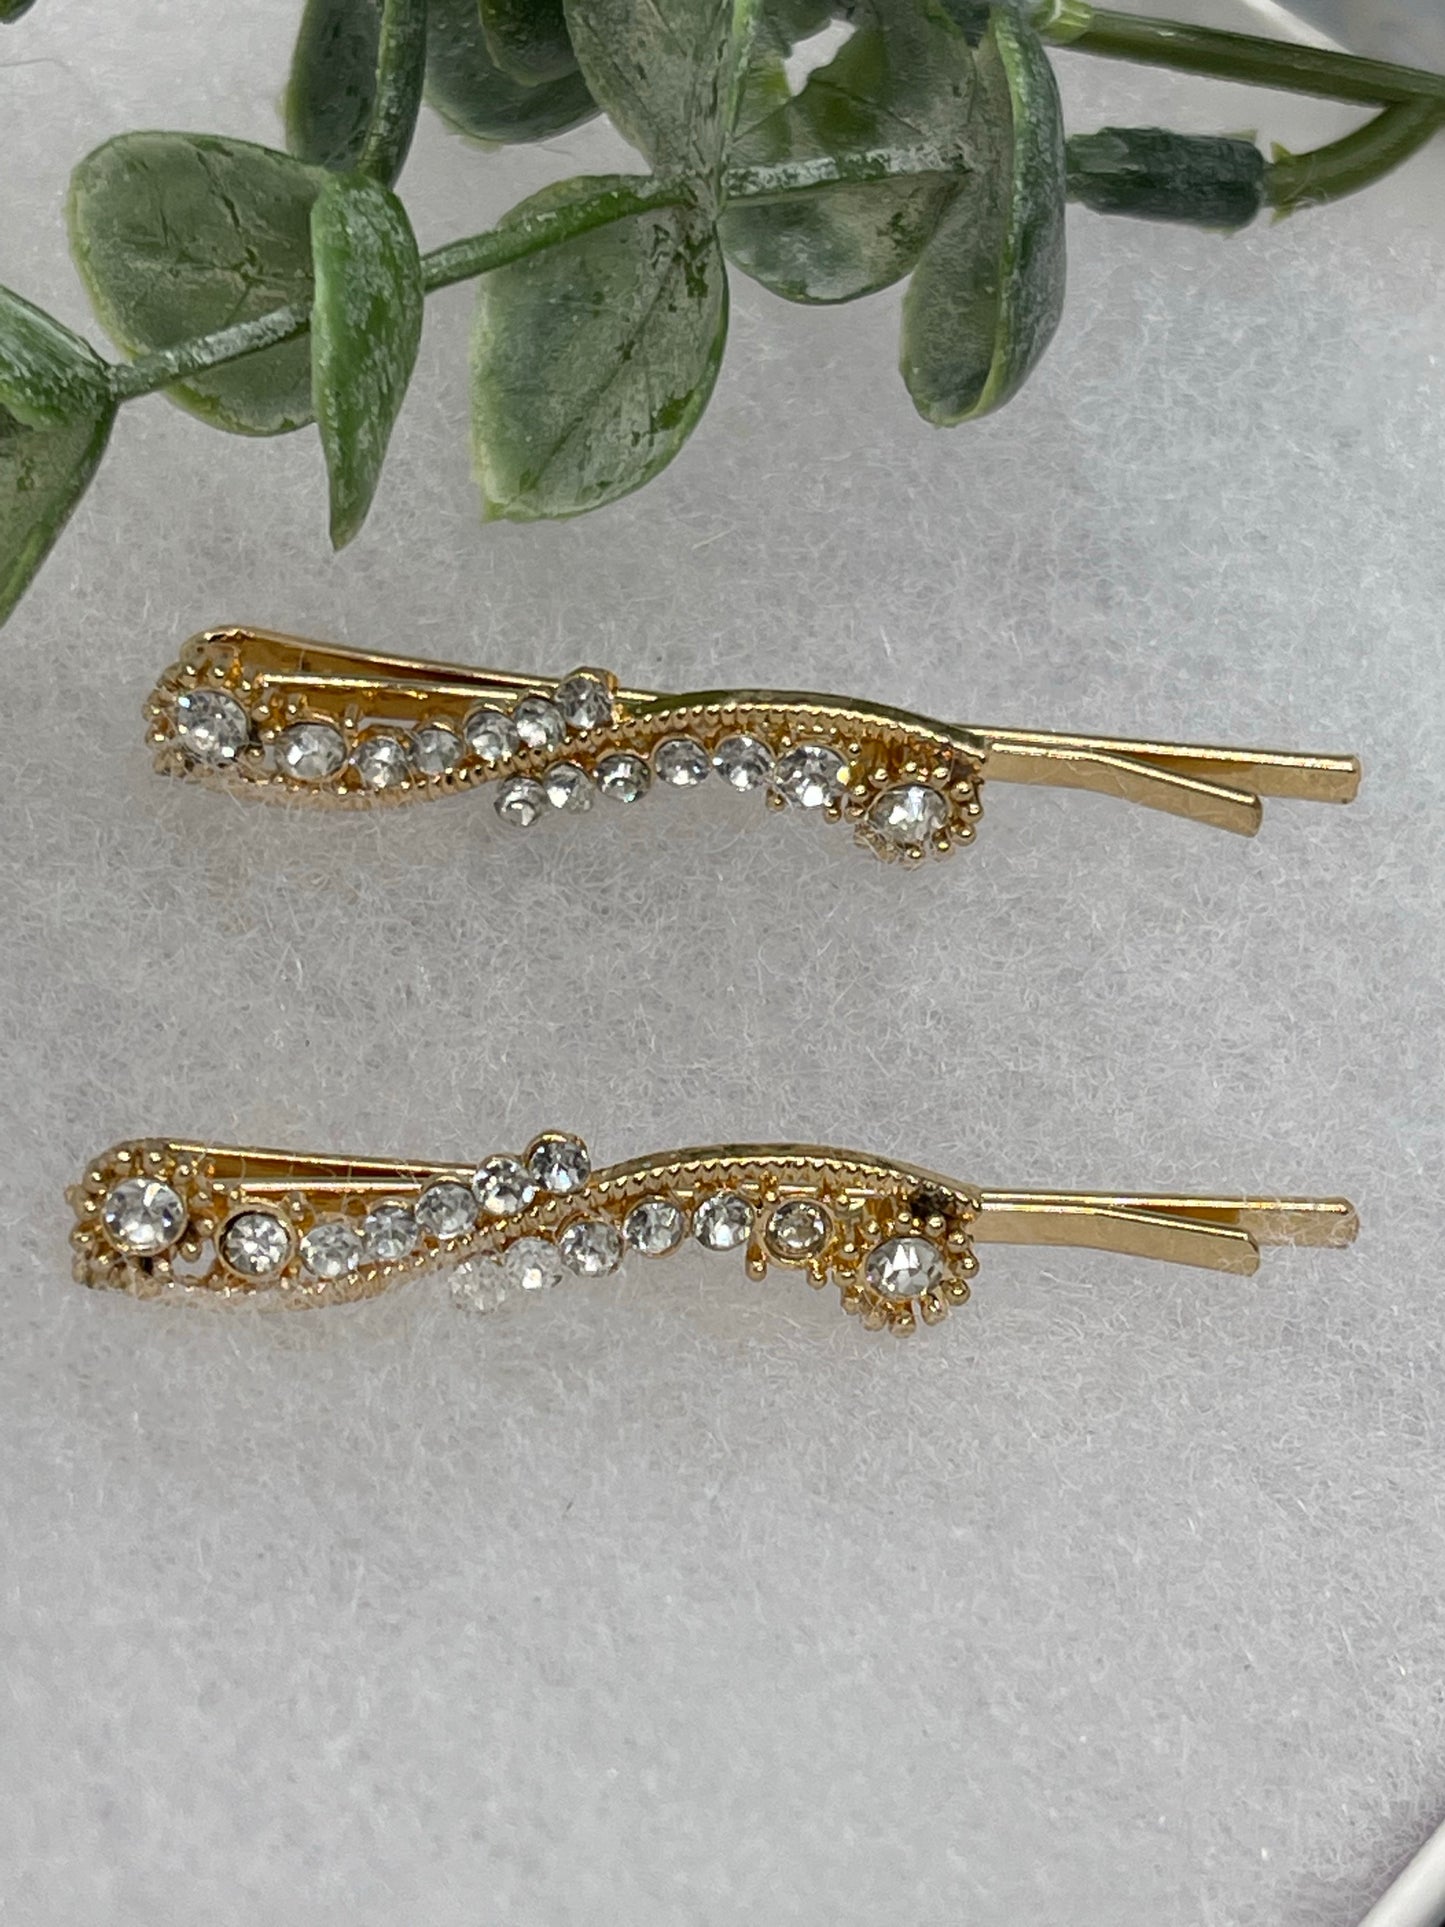 Clear crystal rhinestone approximately 2.0” gold tone hair pins 2 pc set wedding bridal shower engagement formal princess accessory accessories